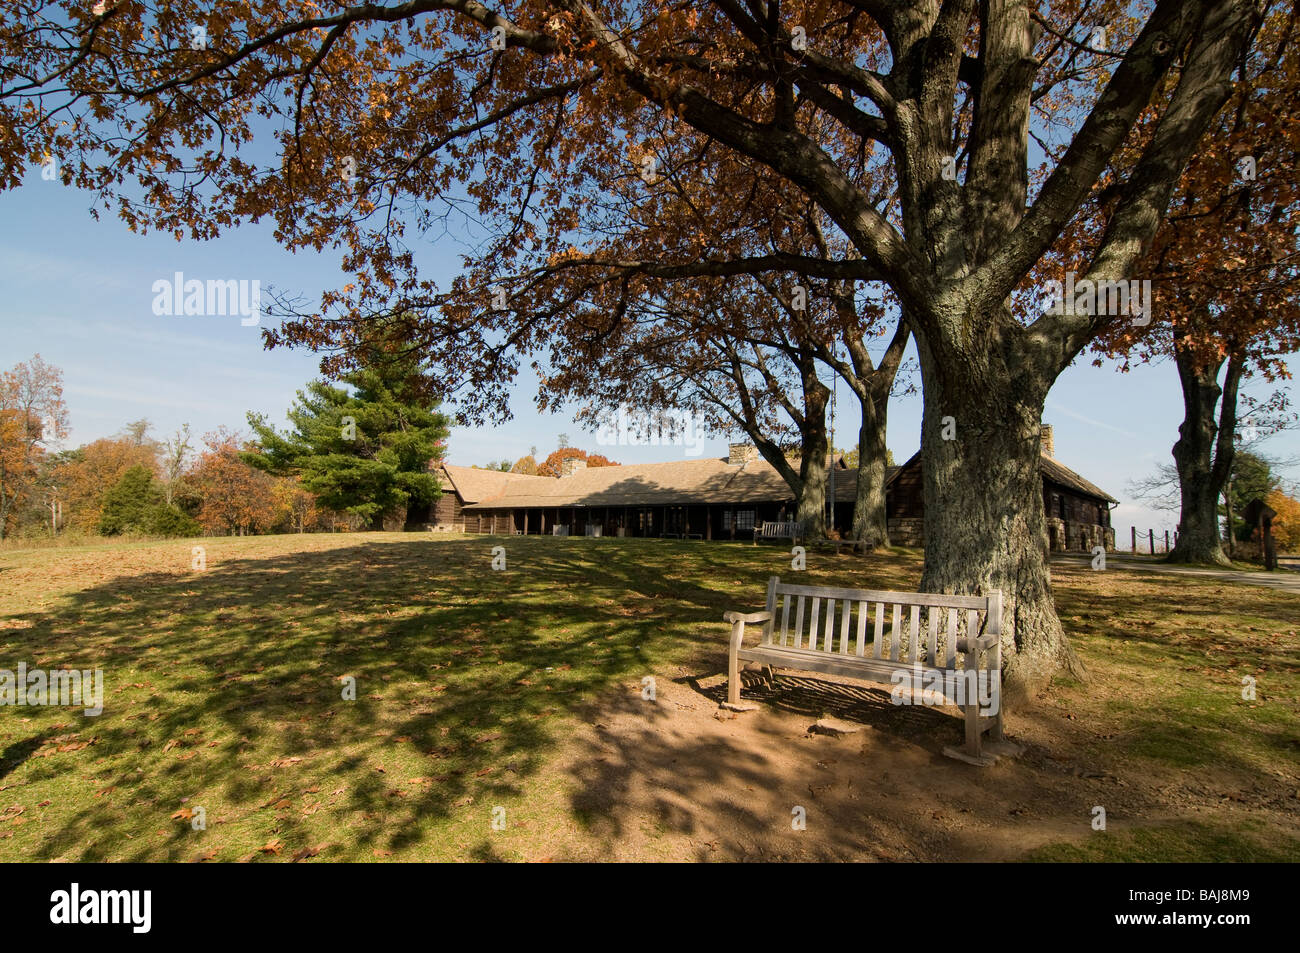 Calm place with bench and building in the background Shenandoan Nationalpark Virginia United States of America Stock Photo